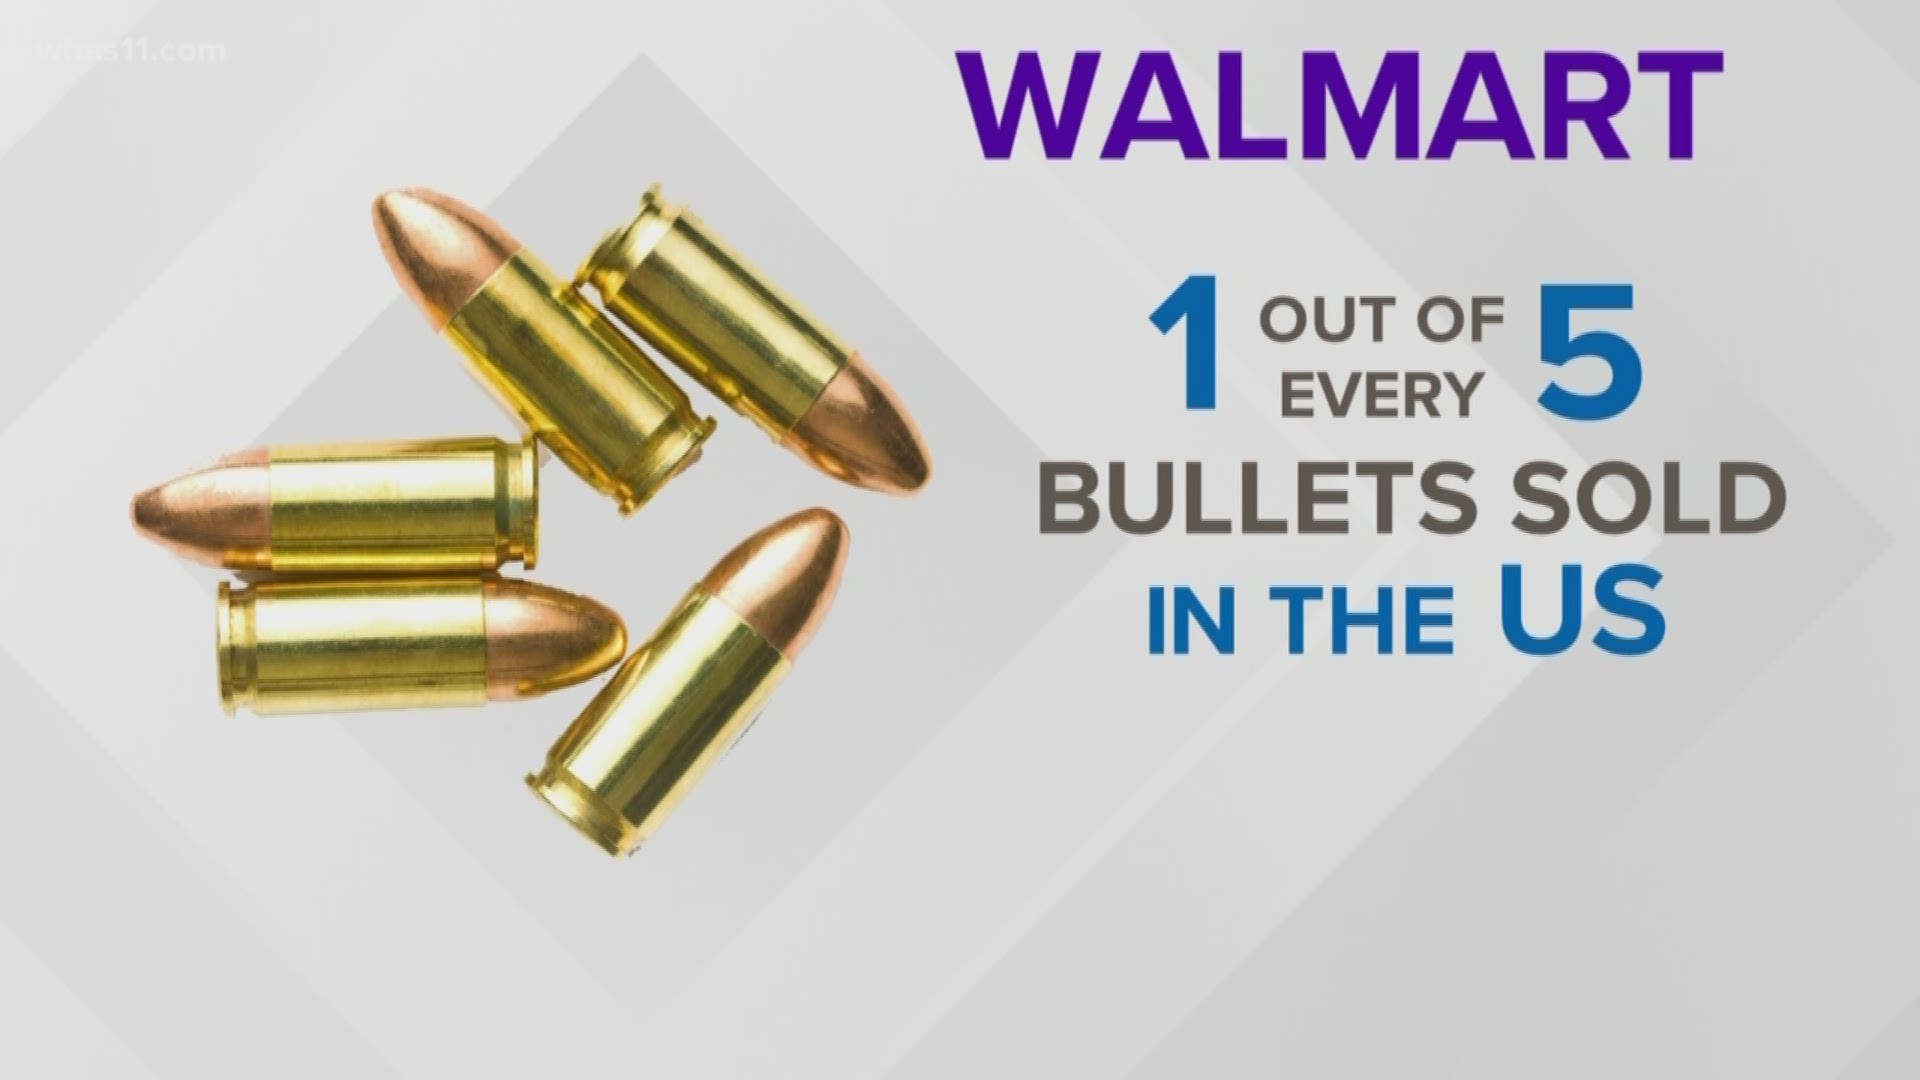 Walmart said it will stop selling handgun and short-barrel rifle ammunition, while requesting that customers not openly carry firearms in its stores, even where state laws allow it.